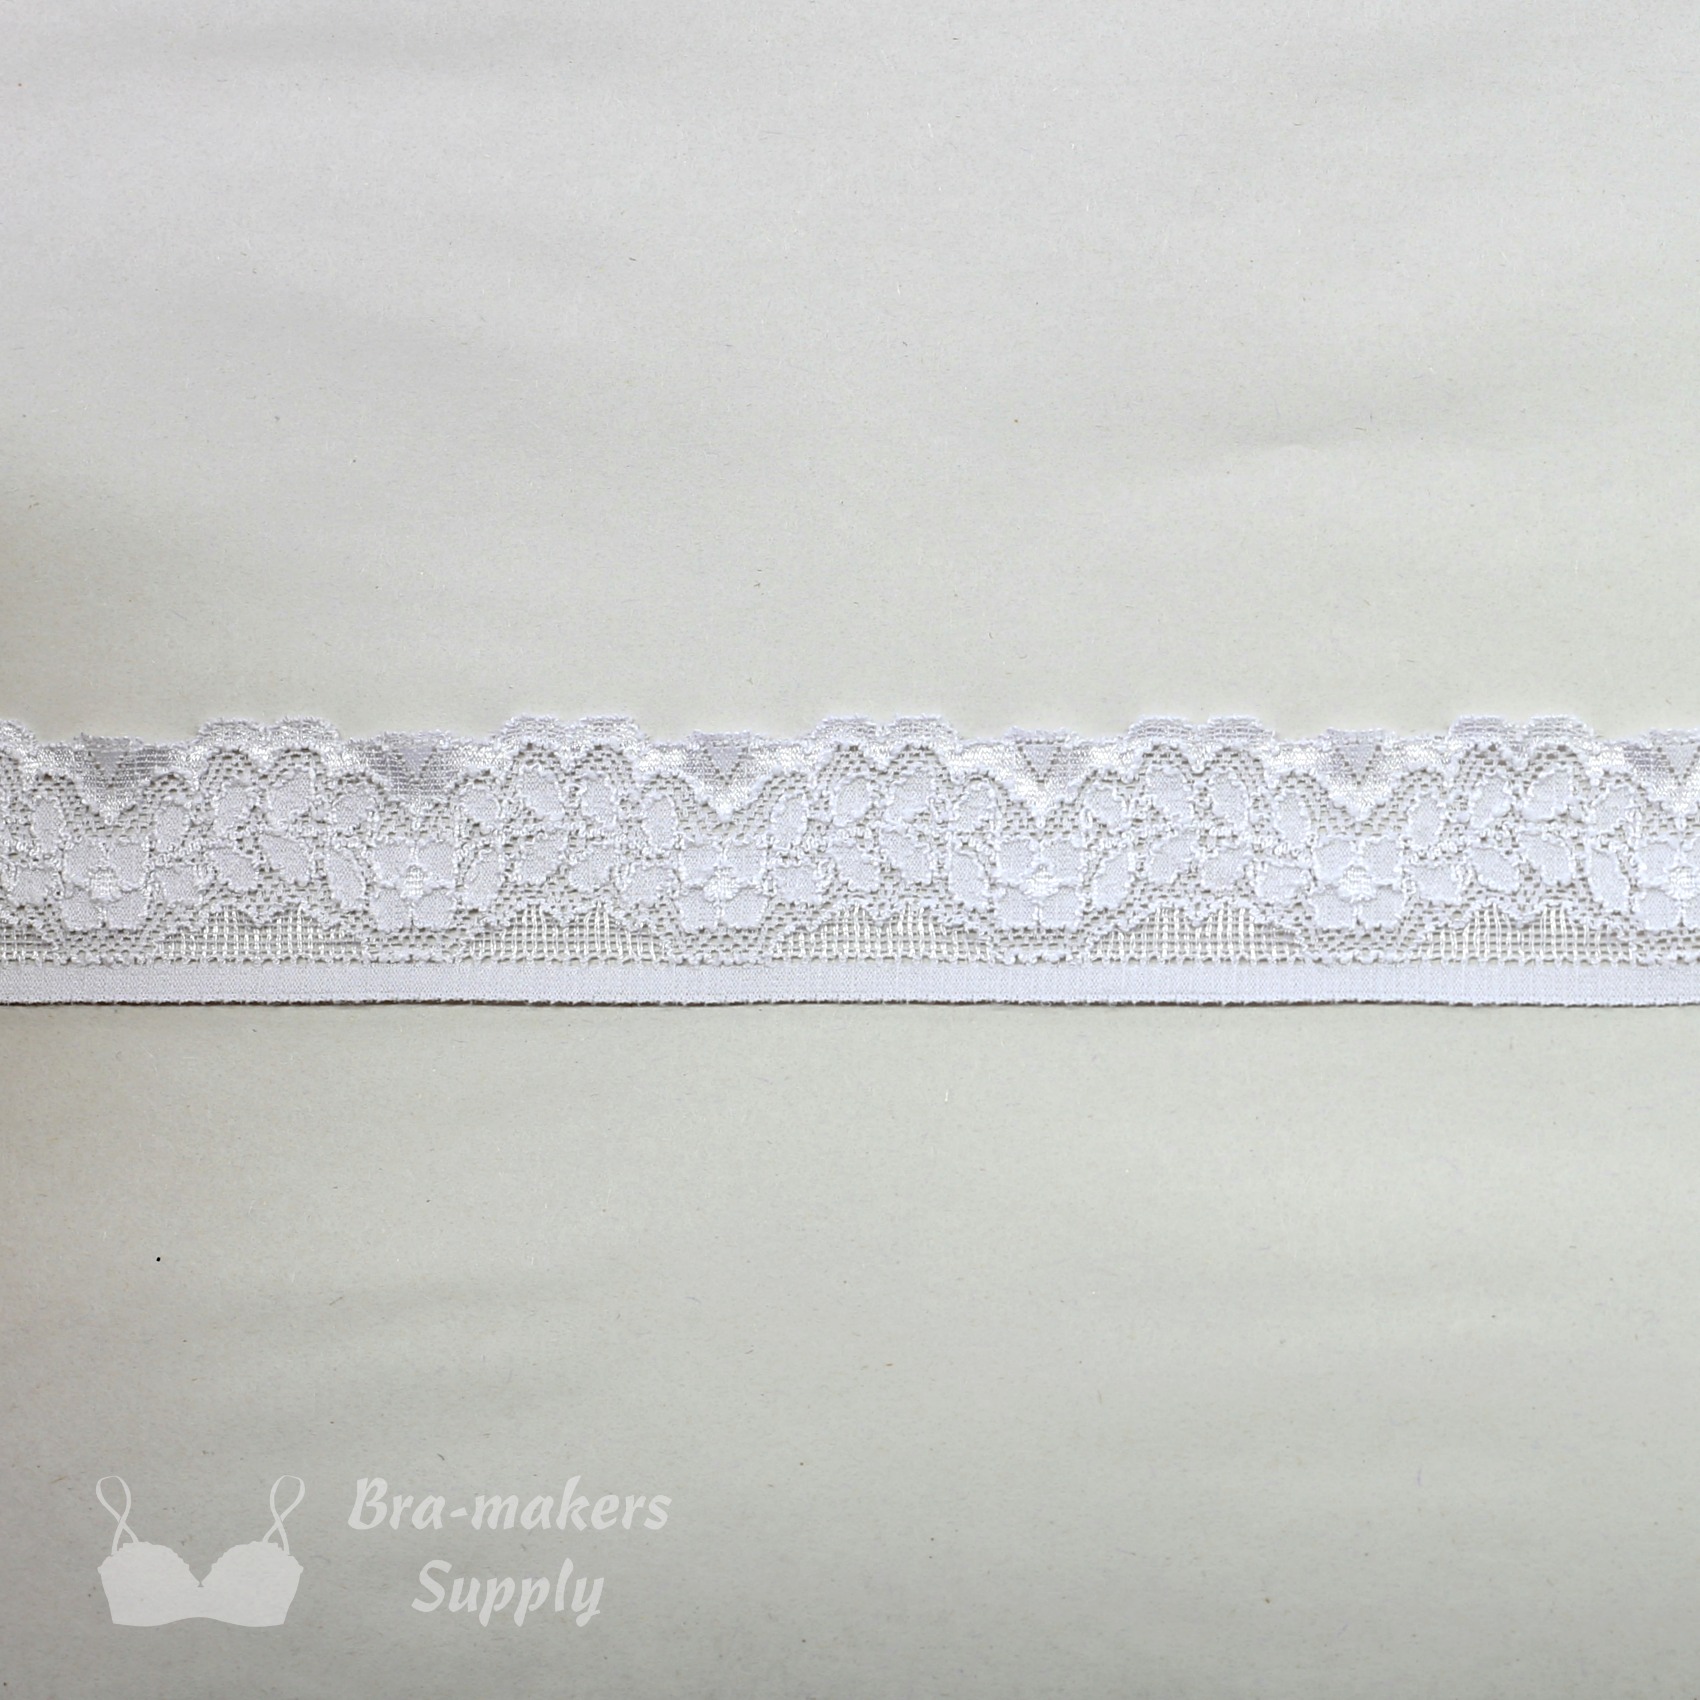 https://www.braandcorsetsupplies.com/wp-content/uploads/One-and-a-Half-Inch-White-Stretch-Lace-Edging-Bra-makers-supply-.jpg